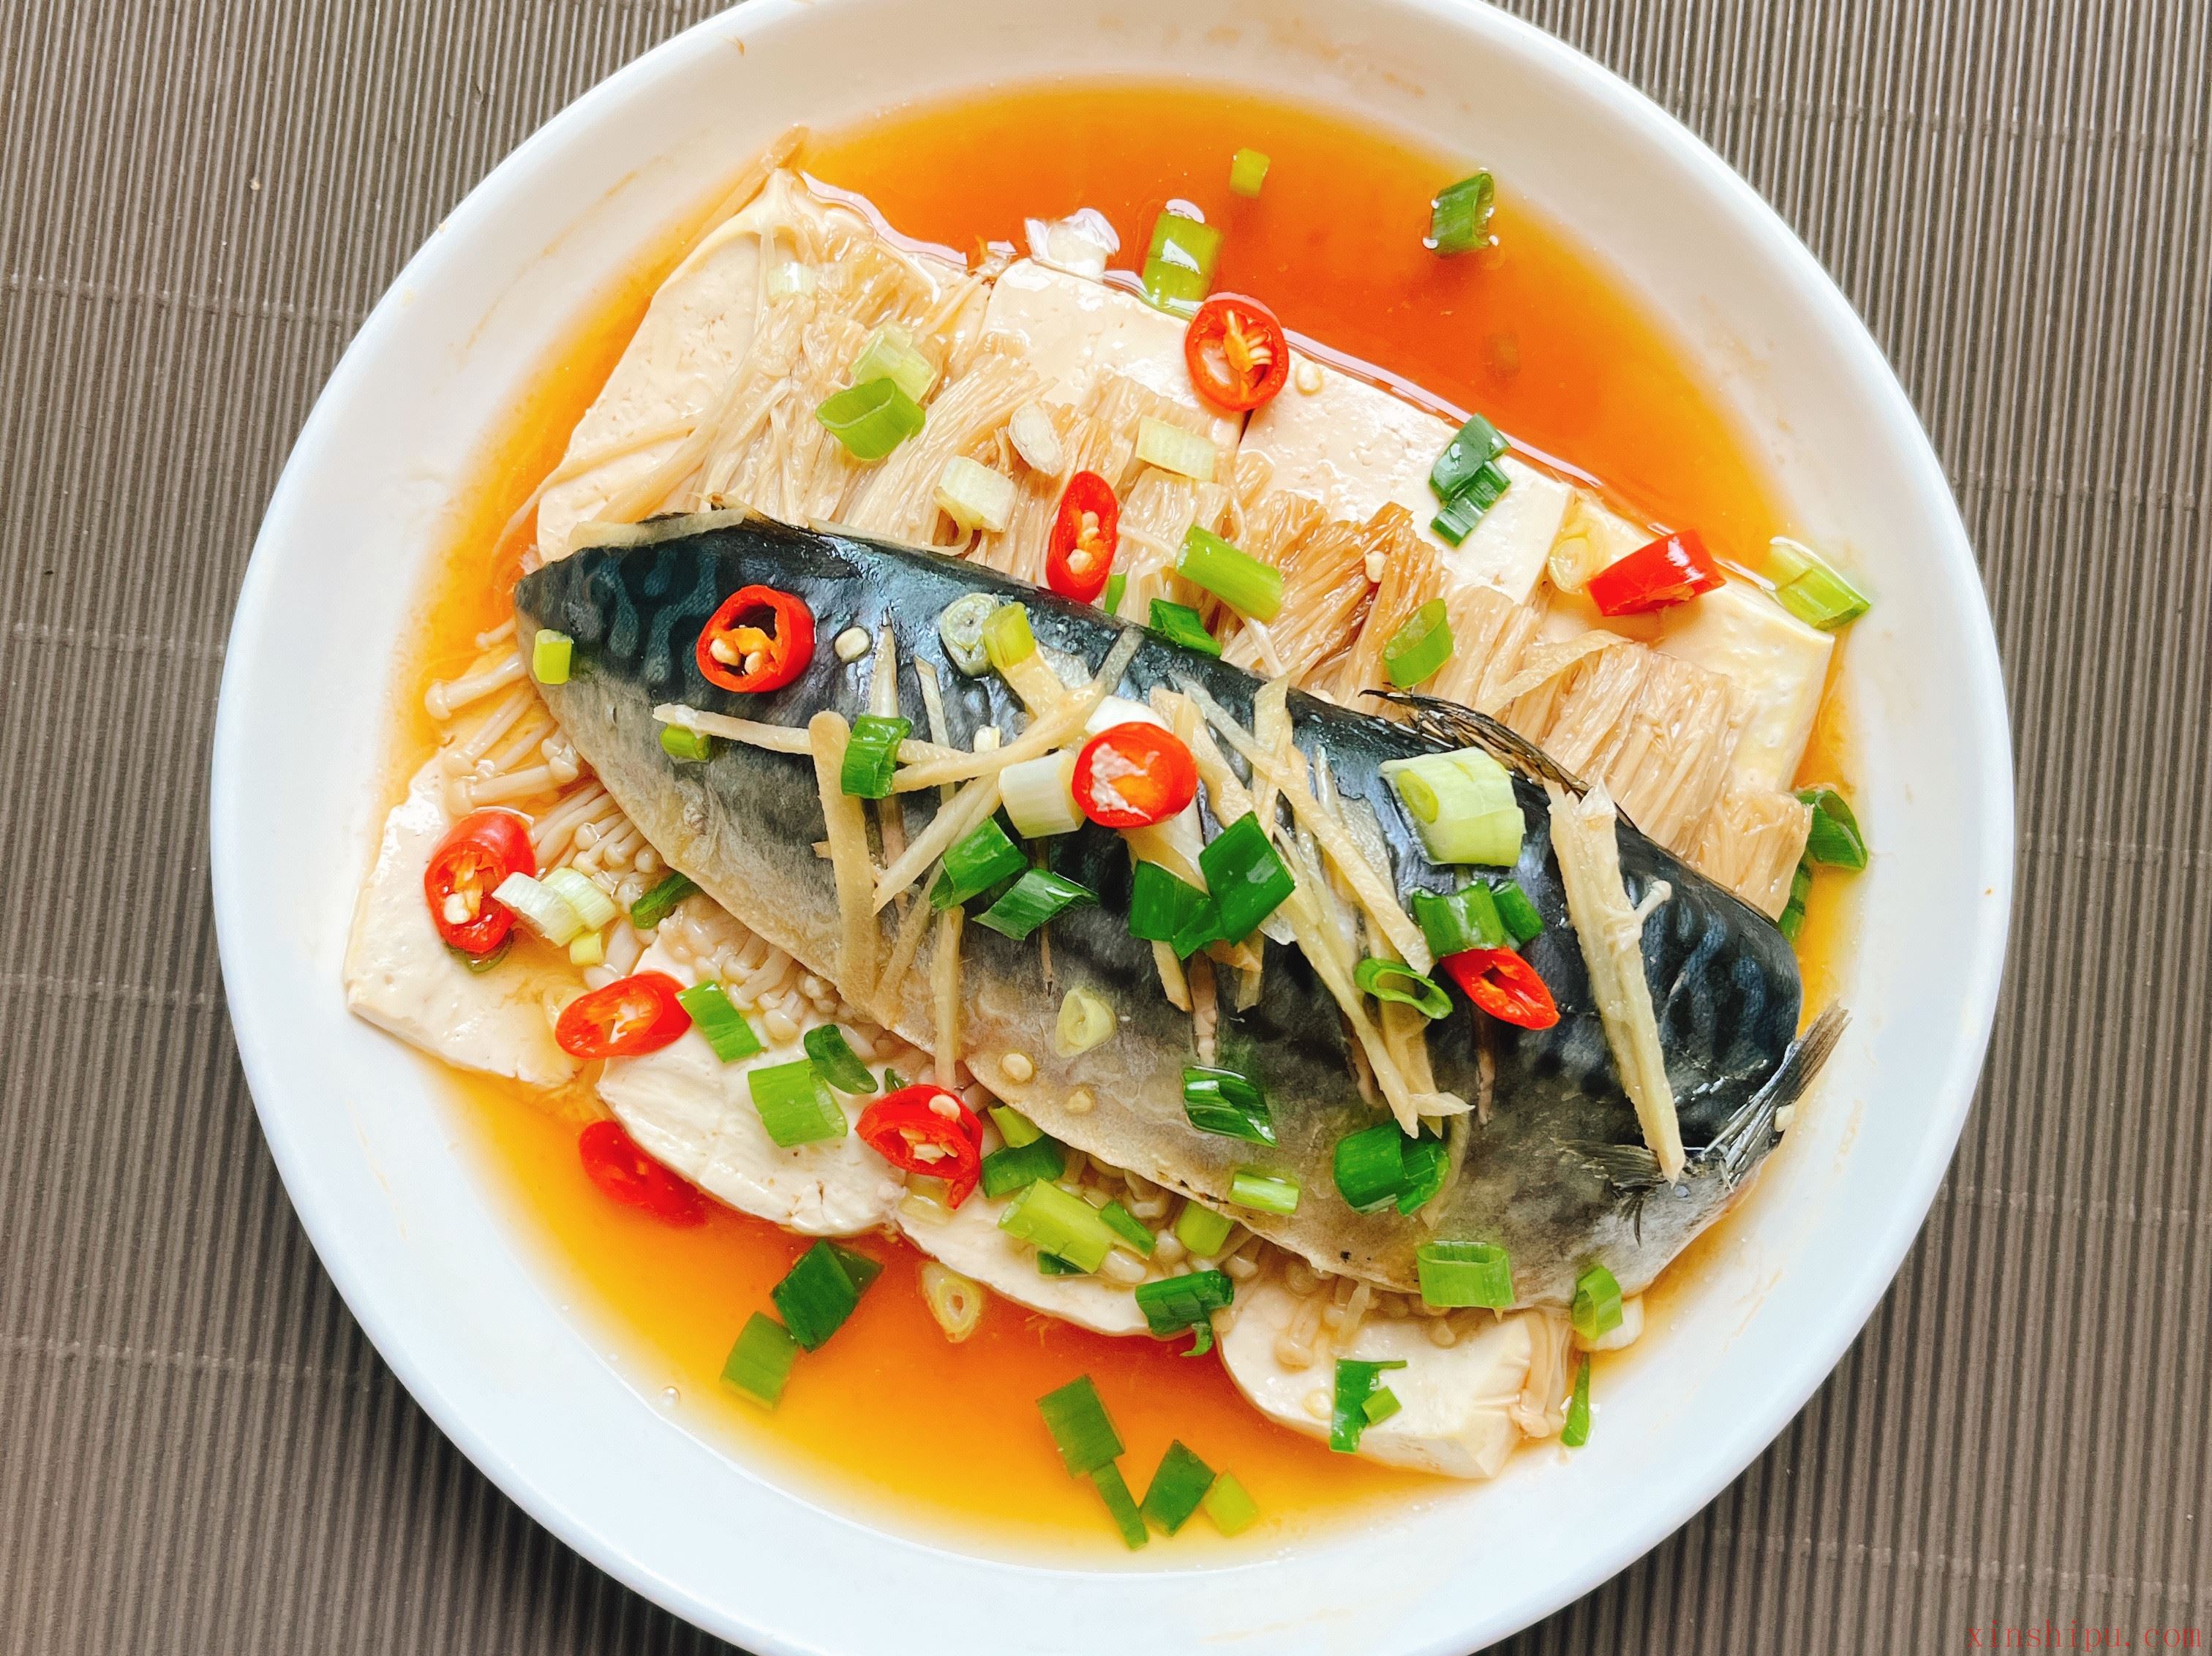 My Cooking Recipe : 咸鱼蒸猪肉片Steamed salted Fish With Sliced Pork